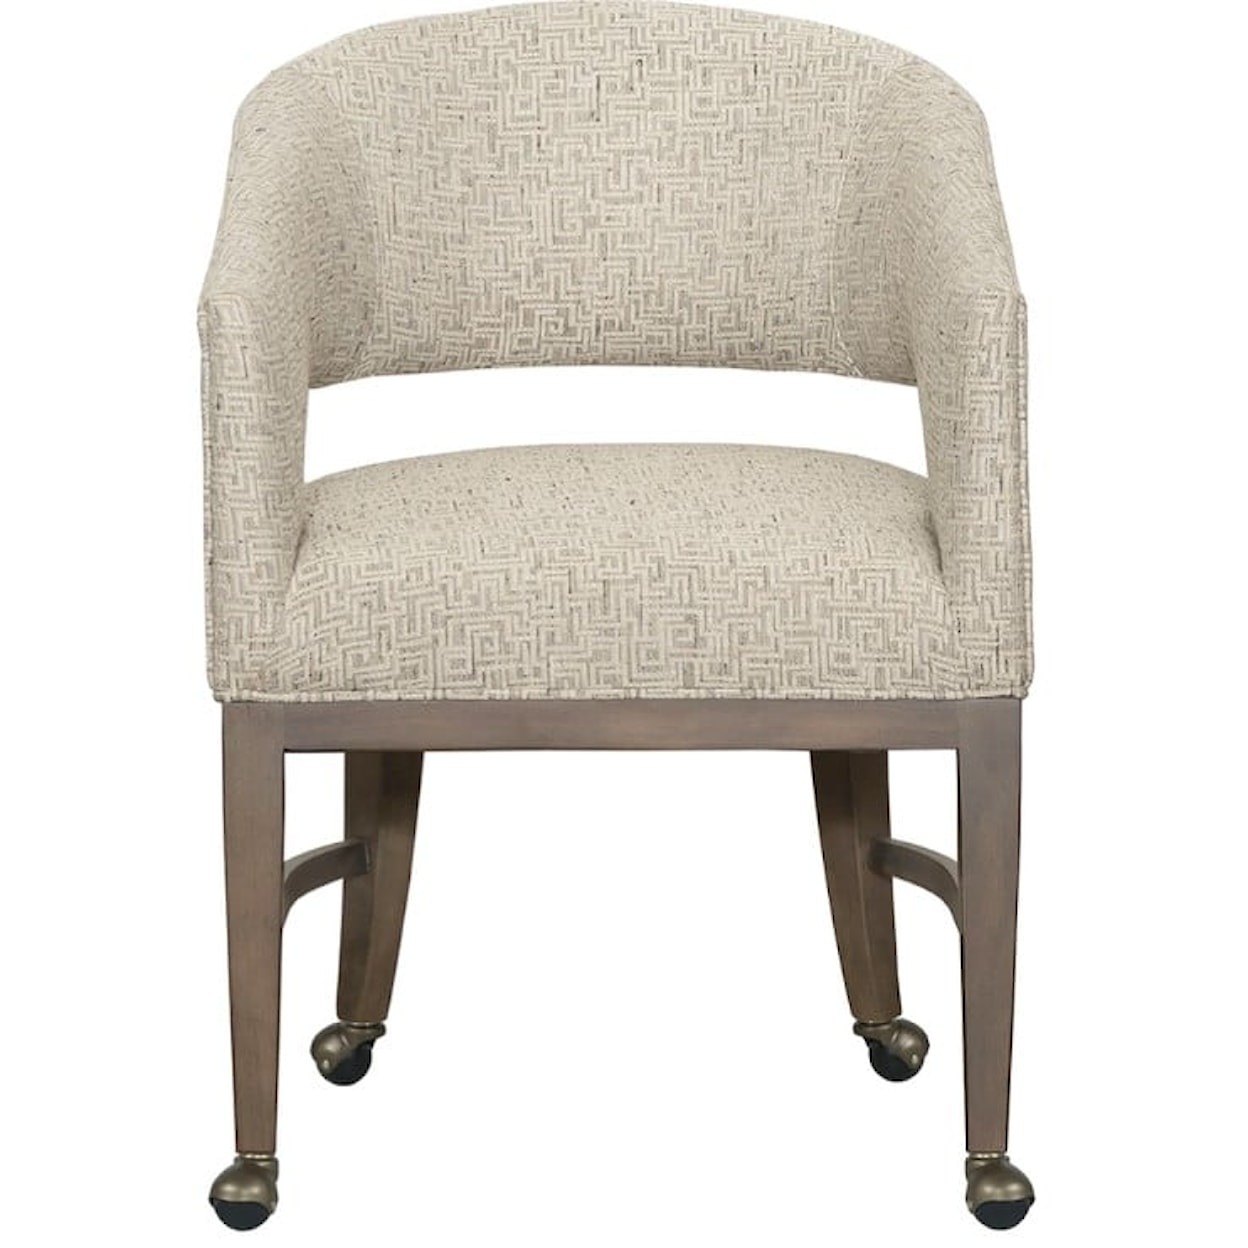 Fairfield Accent Chairs CLEO ARM CHAIR